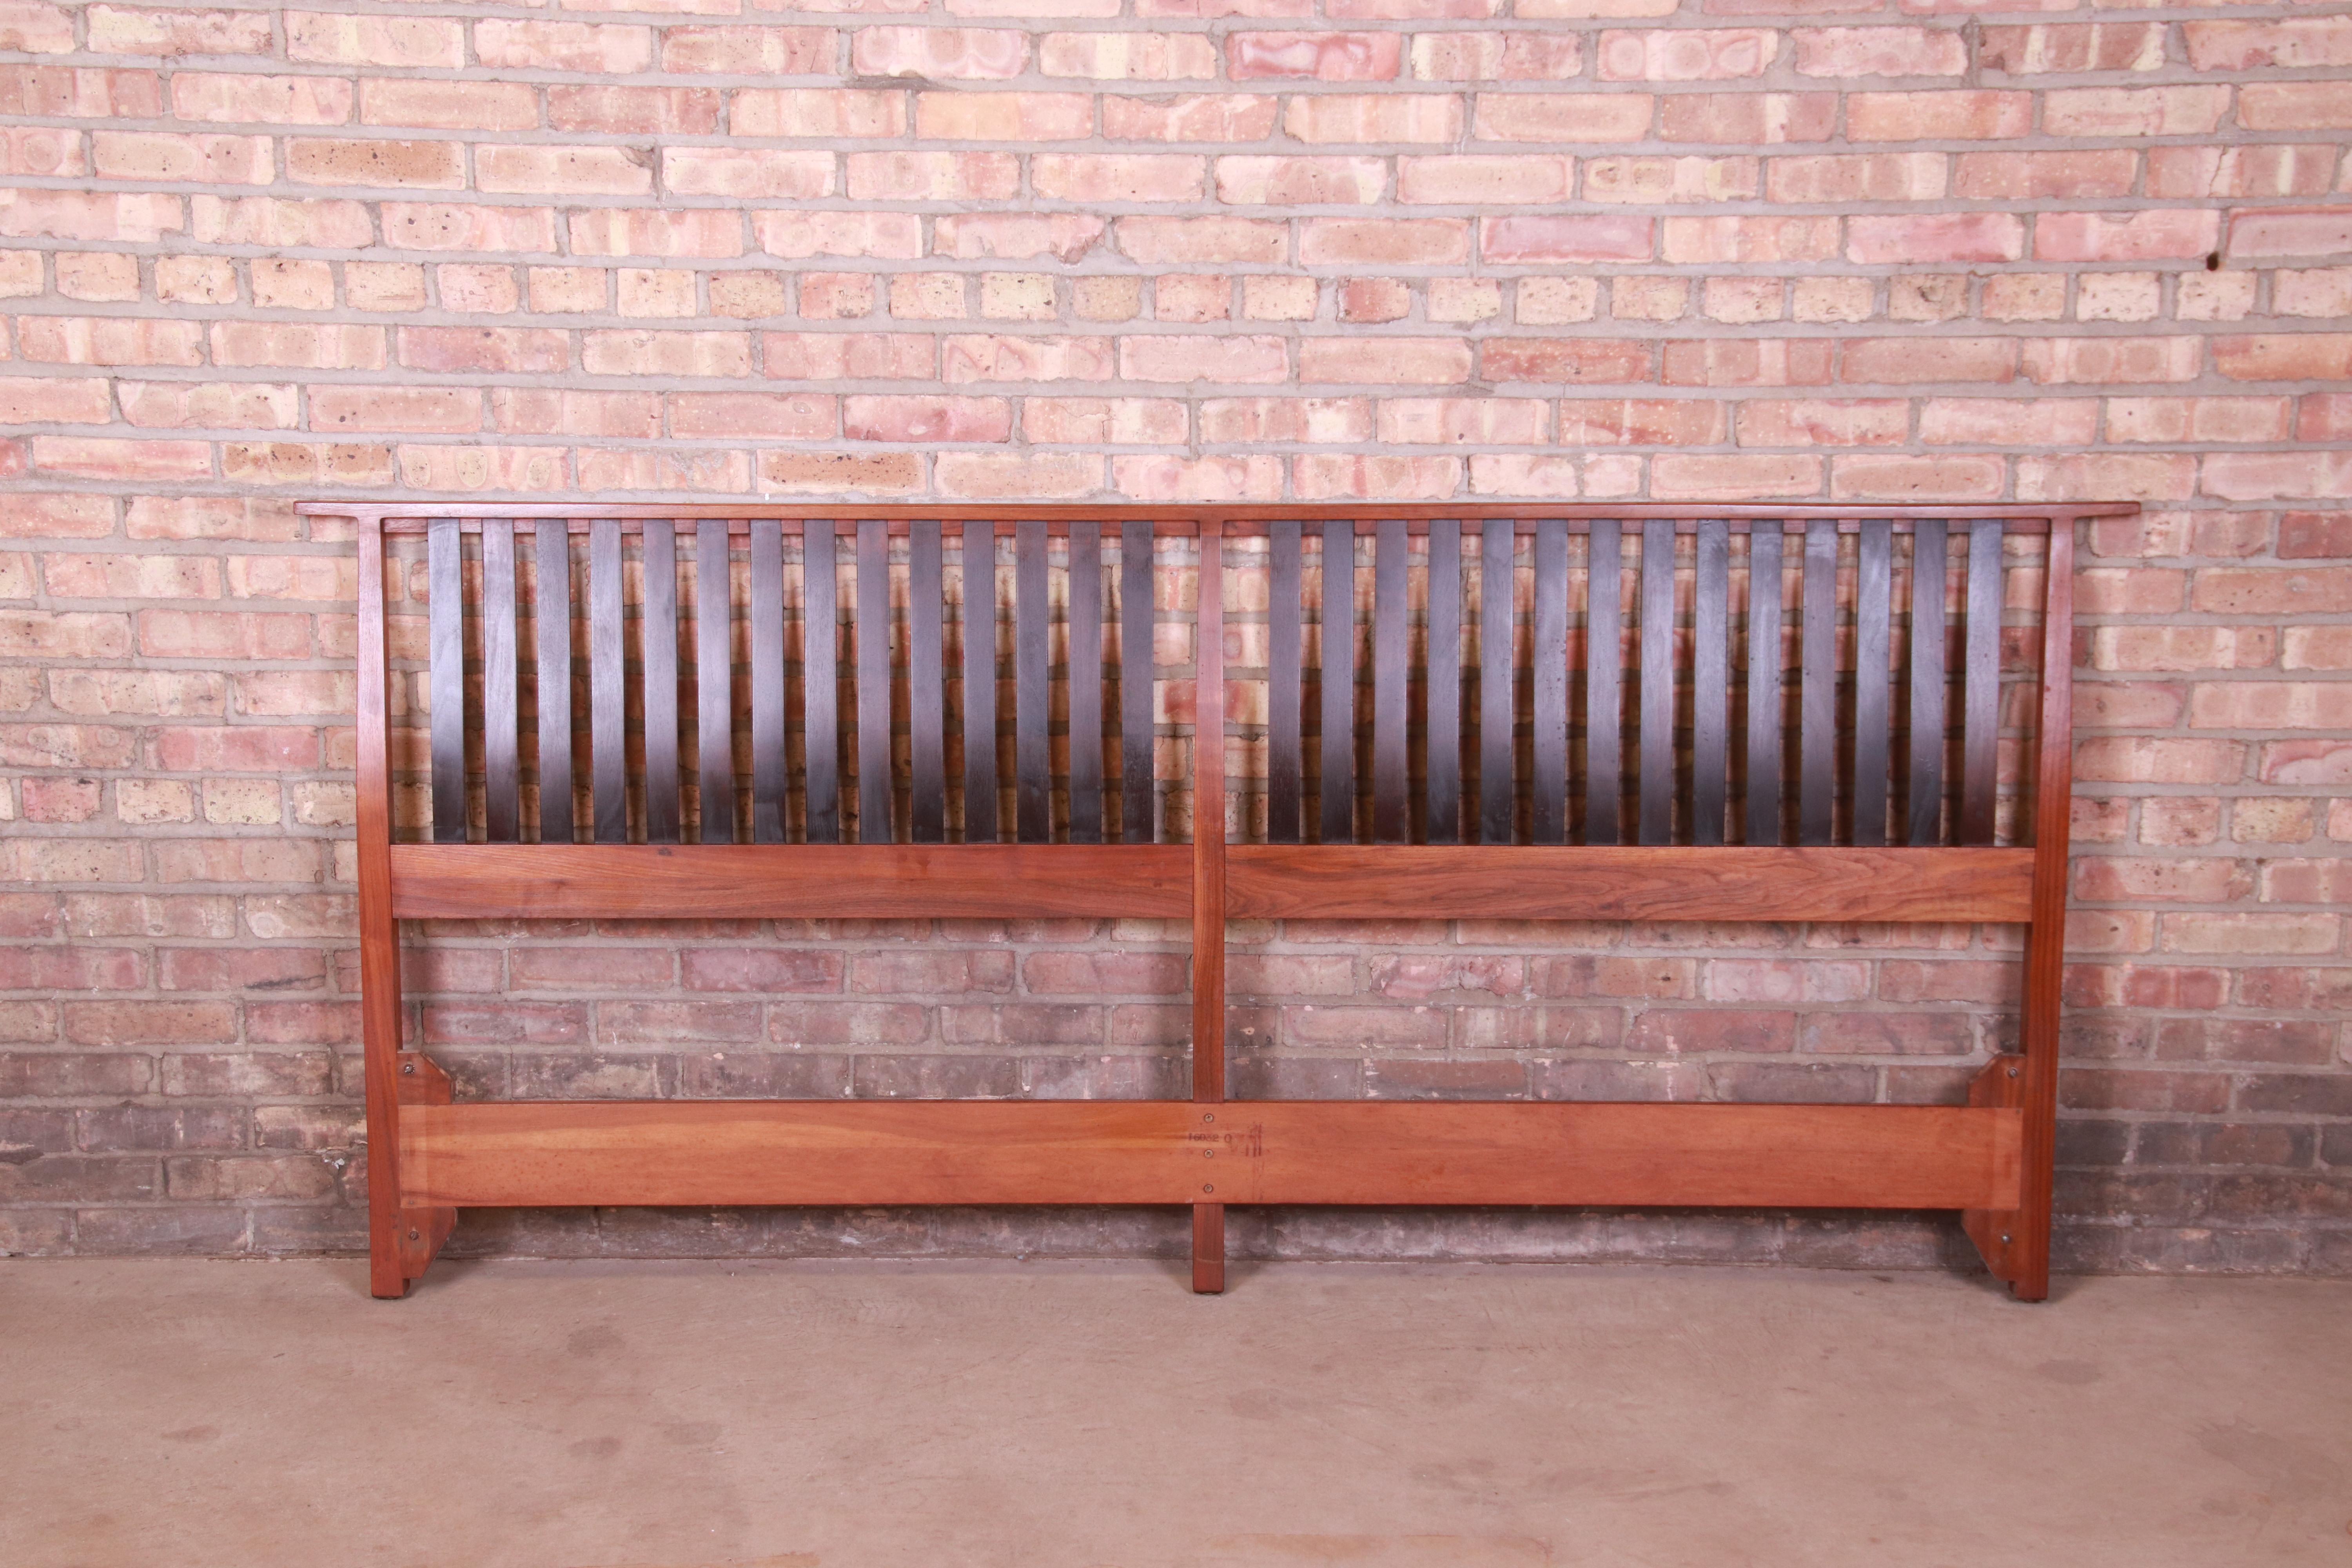 A gorgeous Mid-Century Modern sculpted walnut slatted king size headboard

In the manner of George Nakashima

USA, Circa 1960s

Measures: 85.5